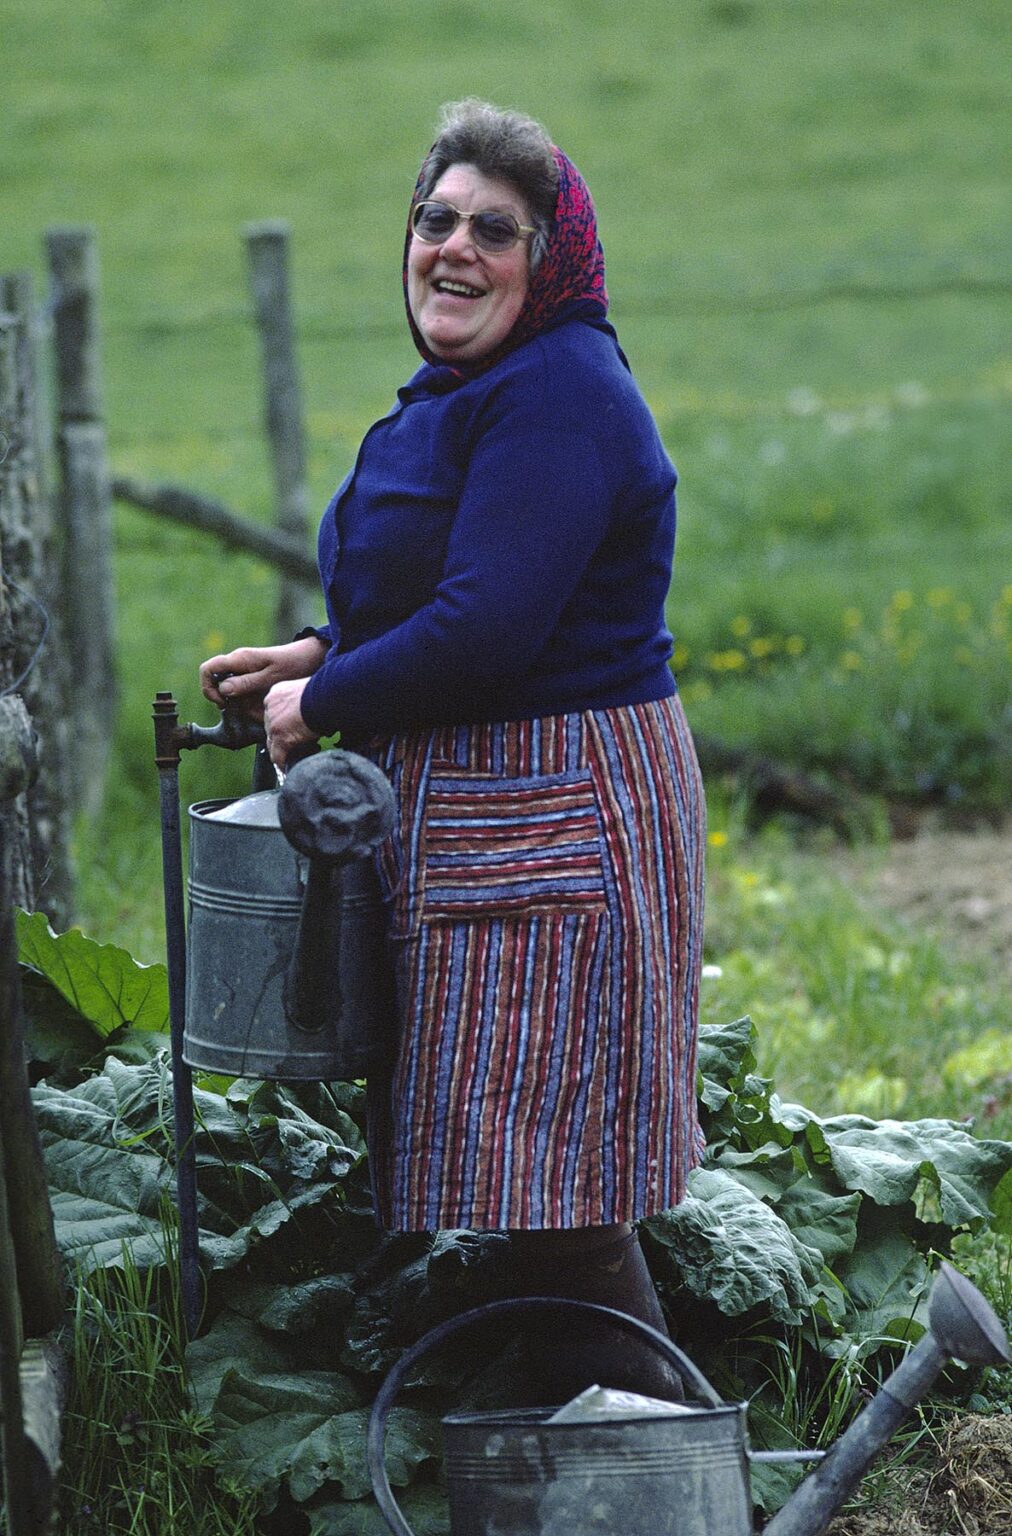 FRENCH COUNTRY WOMAN near ALLEVARD filling WATERING CANS - LOIRE VALLEY, FRANCE